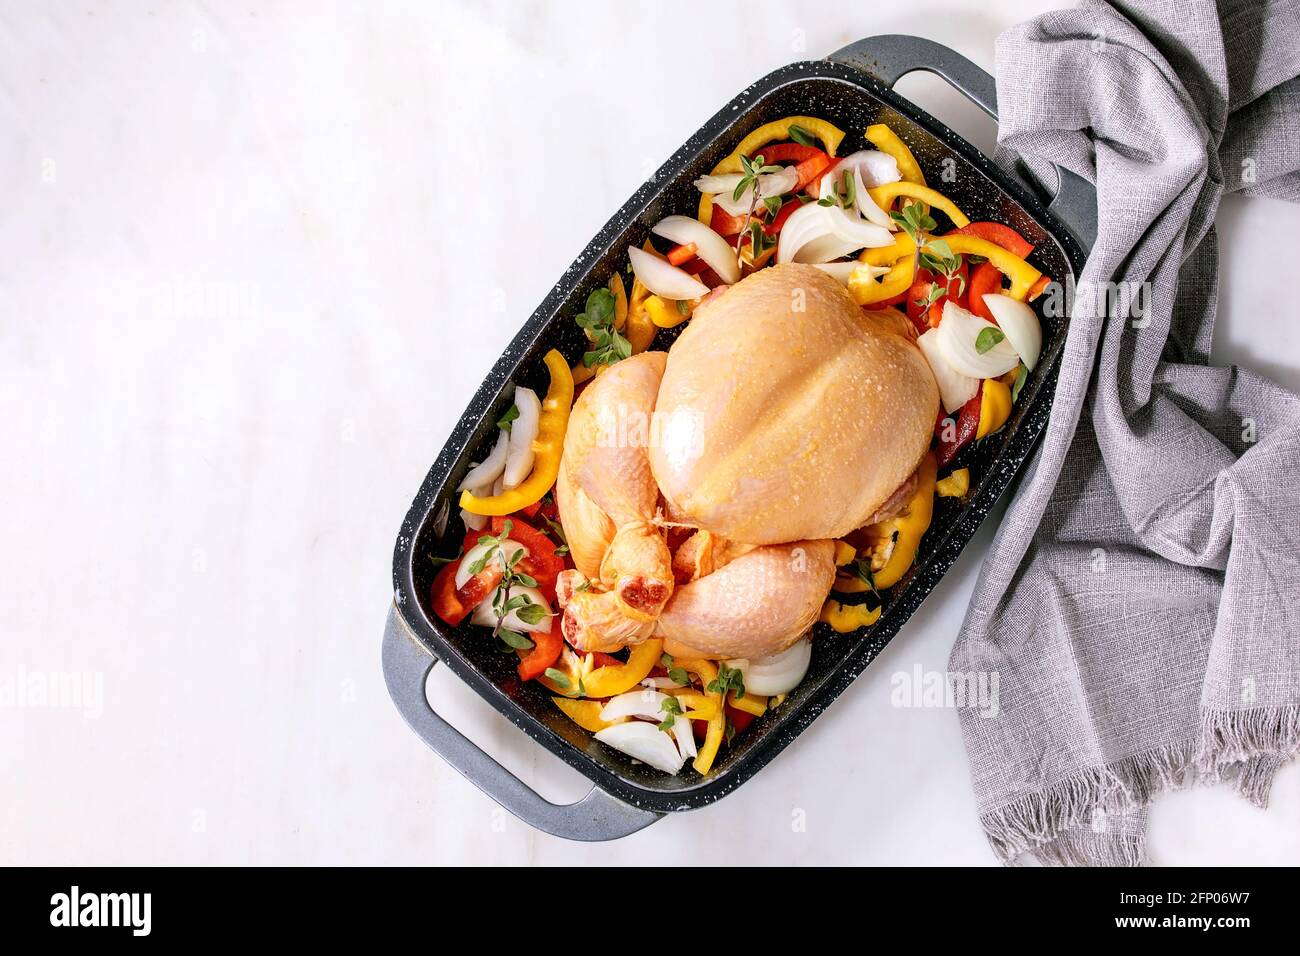 Raw organic uncooked whole chicken with sliced vegetables bell pepper, onion and herbs in oven tray with grey textile napkin, ready to cook. White mar Stock Photo